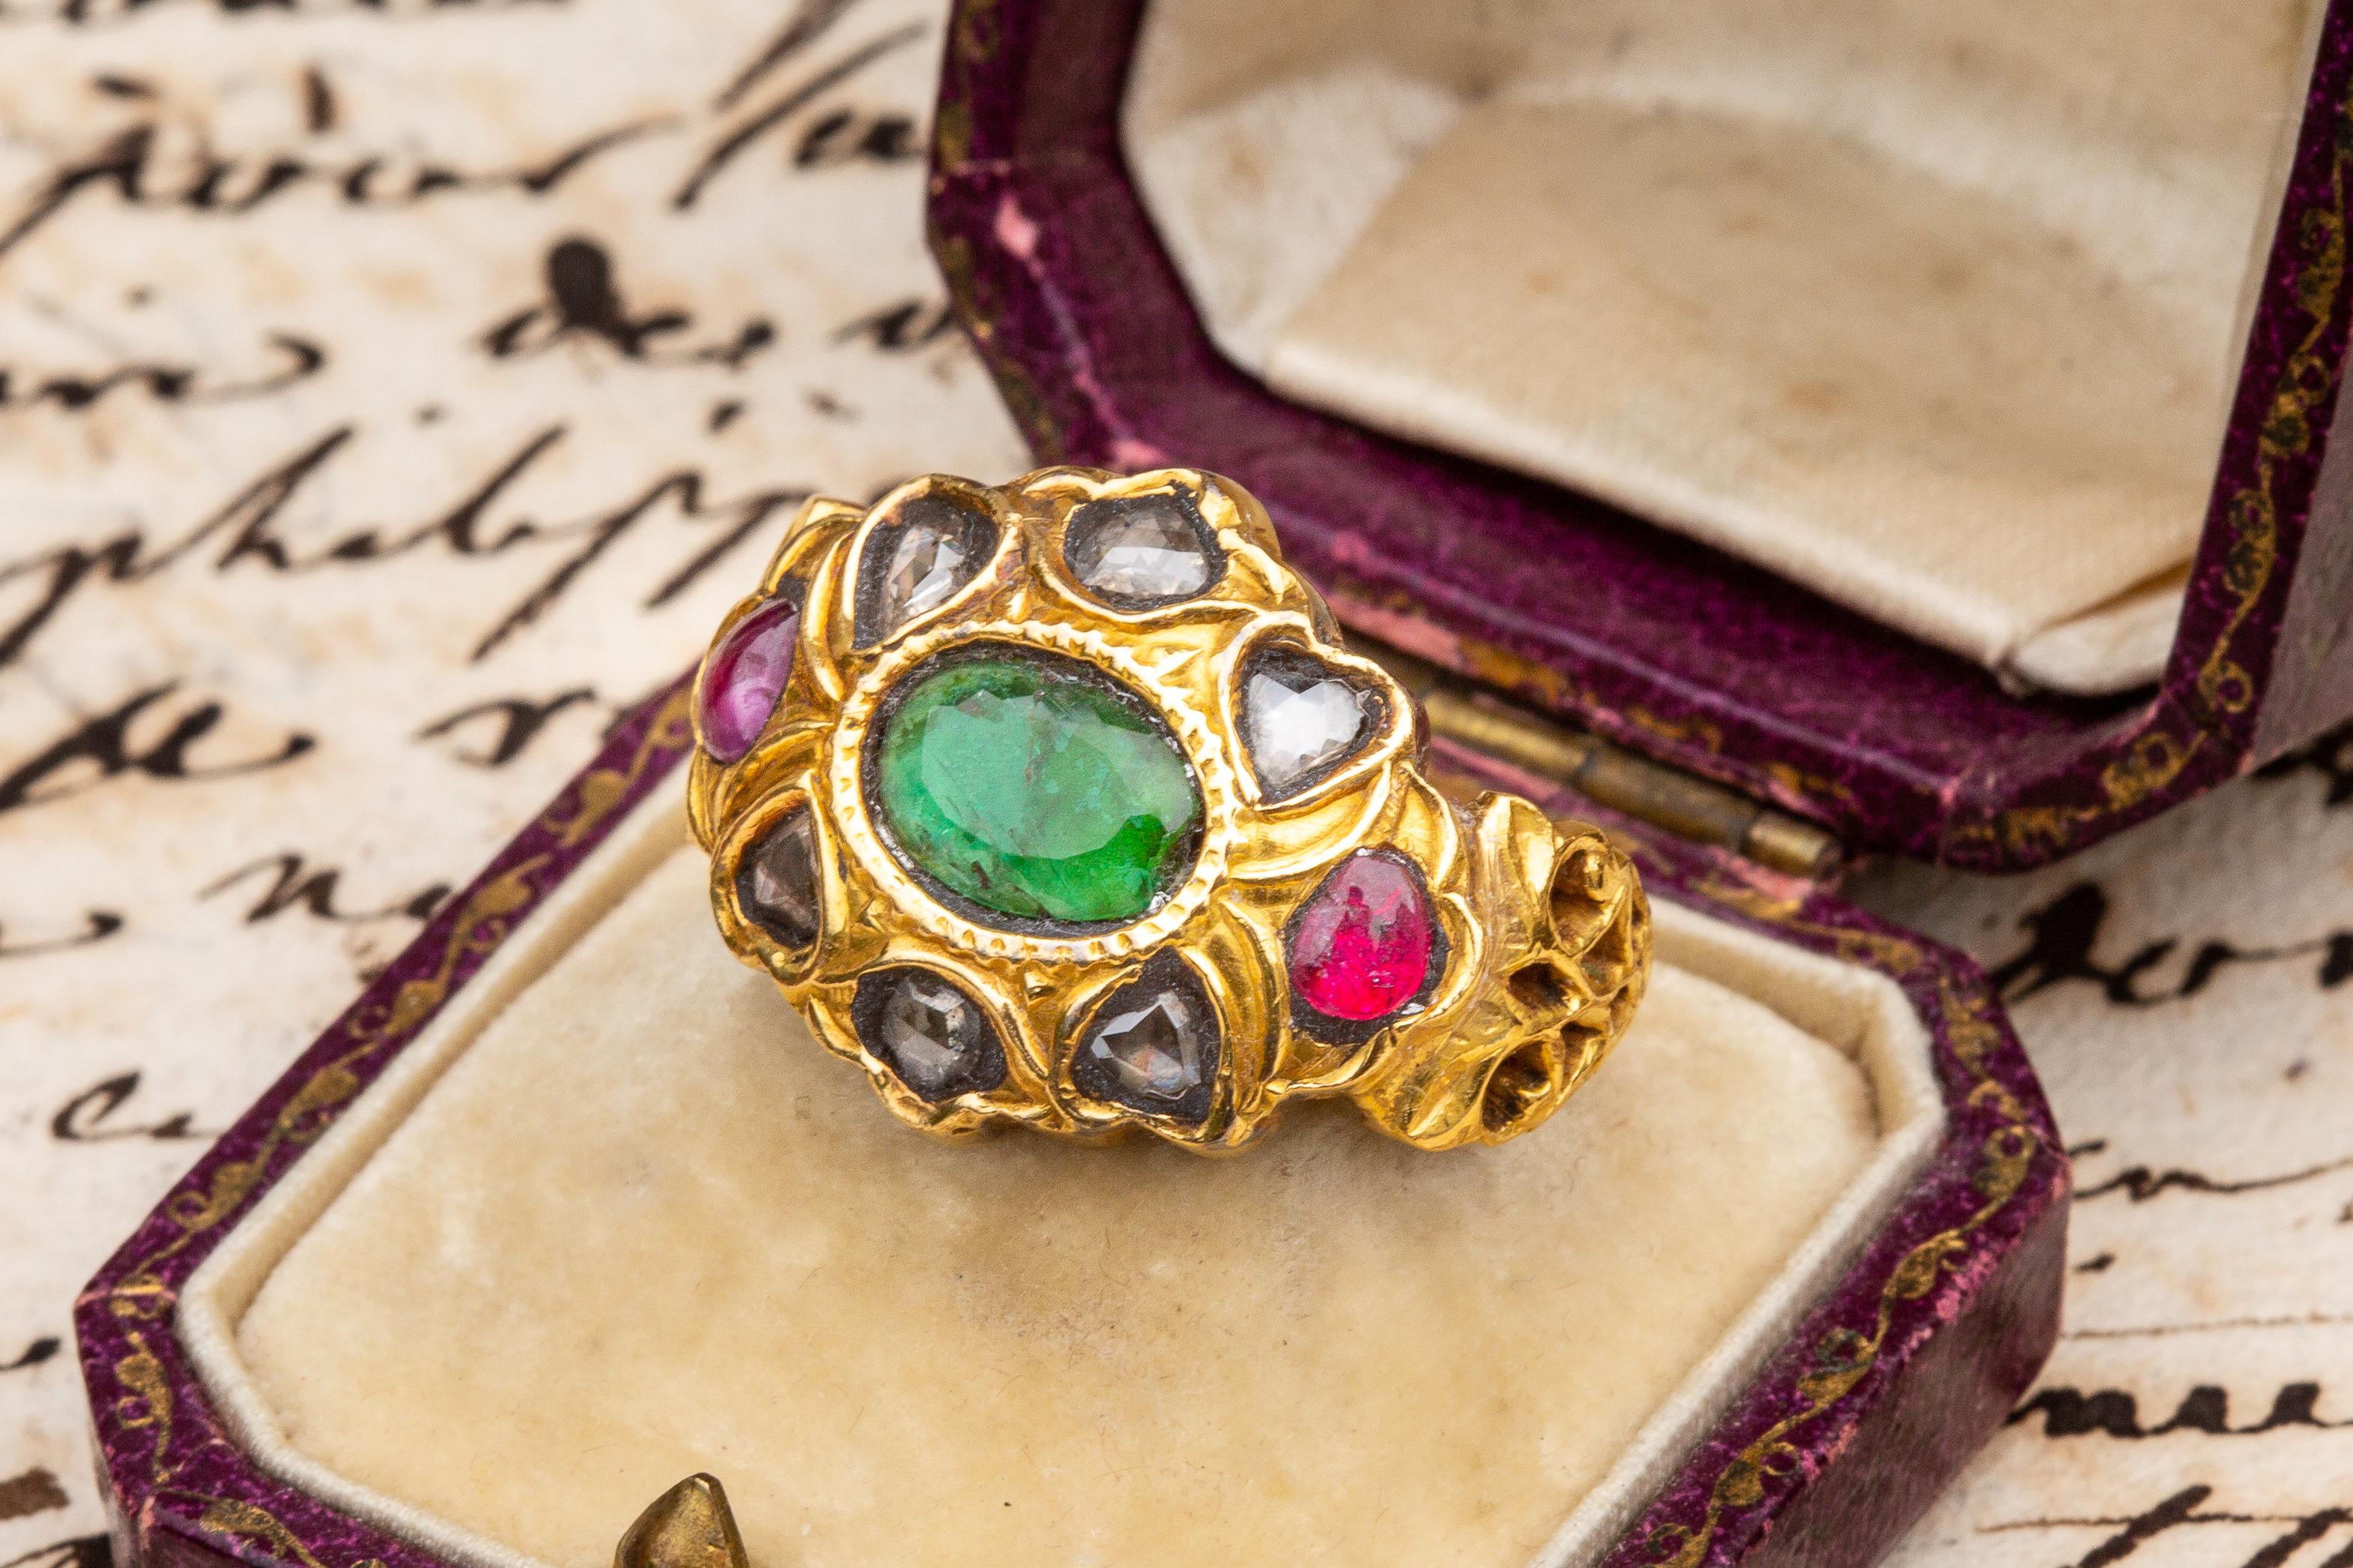 Anglo-Indian 19th Century South Indian Gemstone Cluster Ring Emerald Rubies Diamond